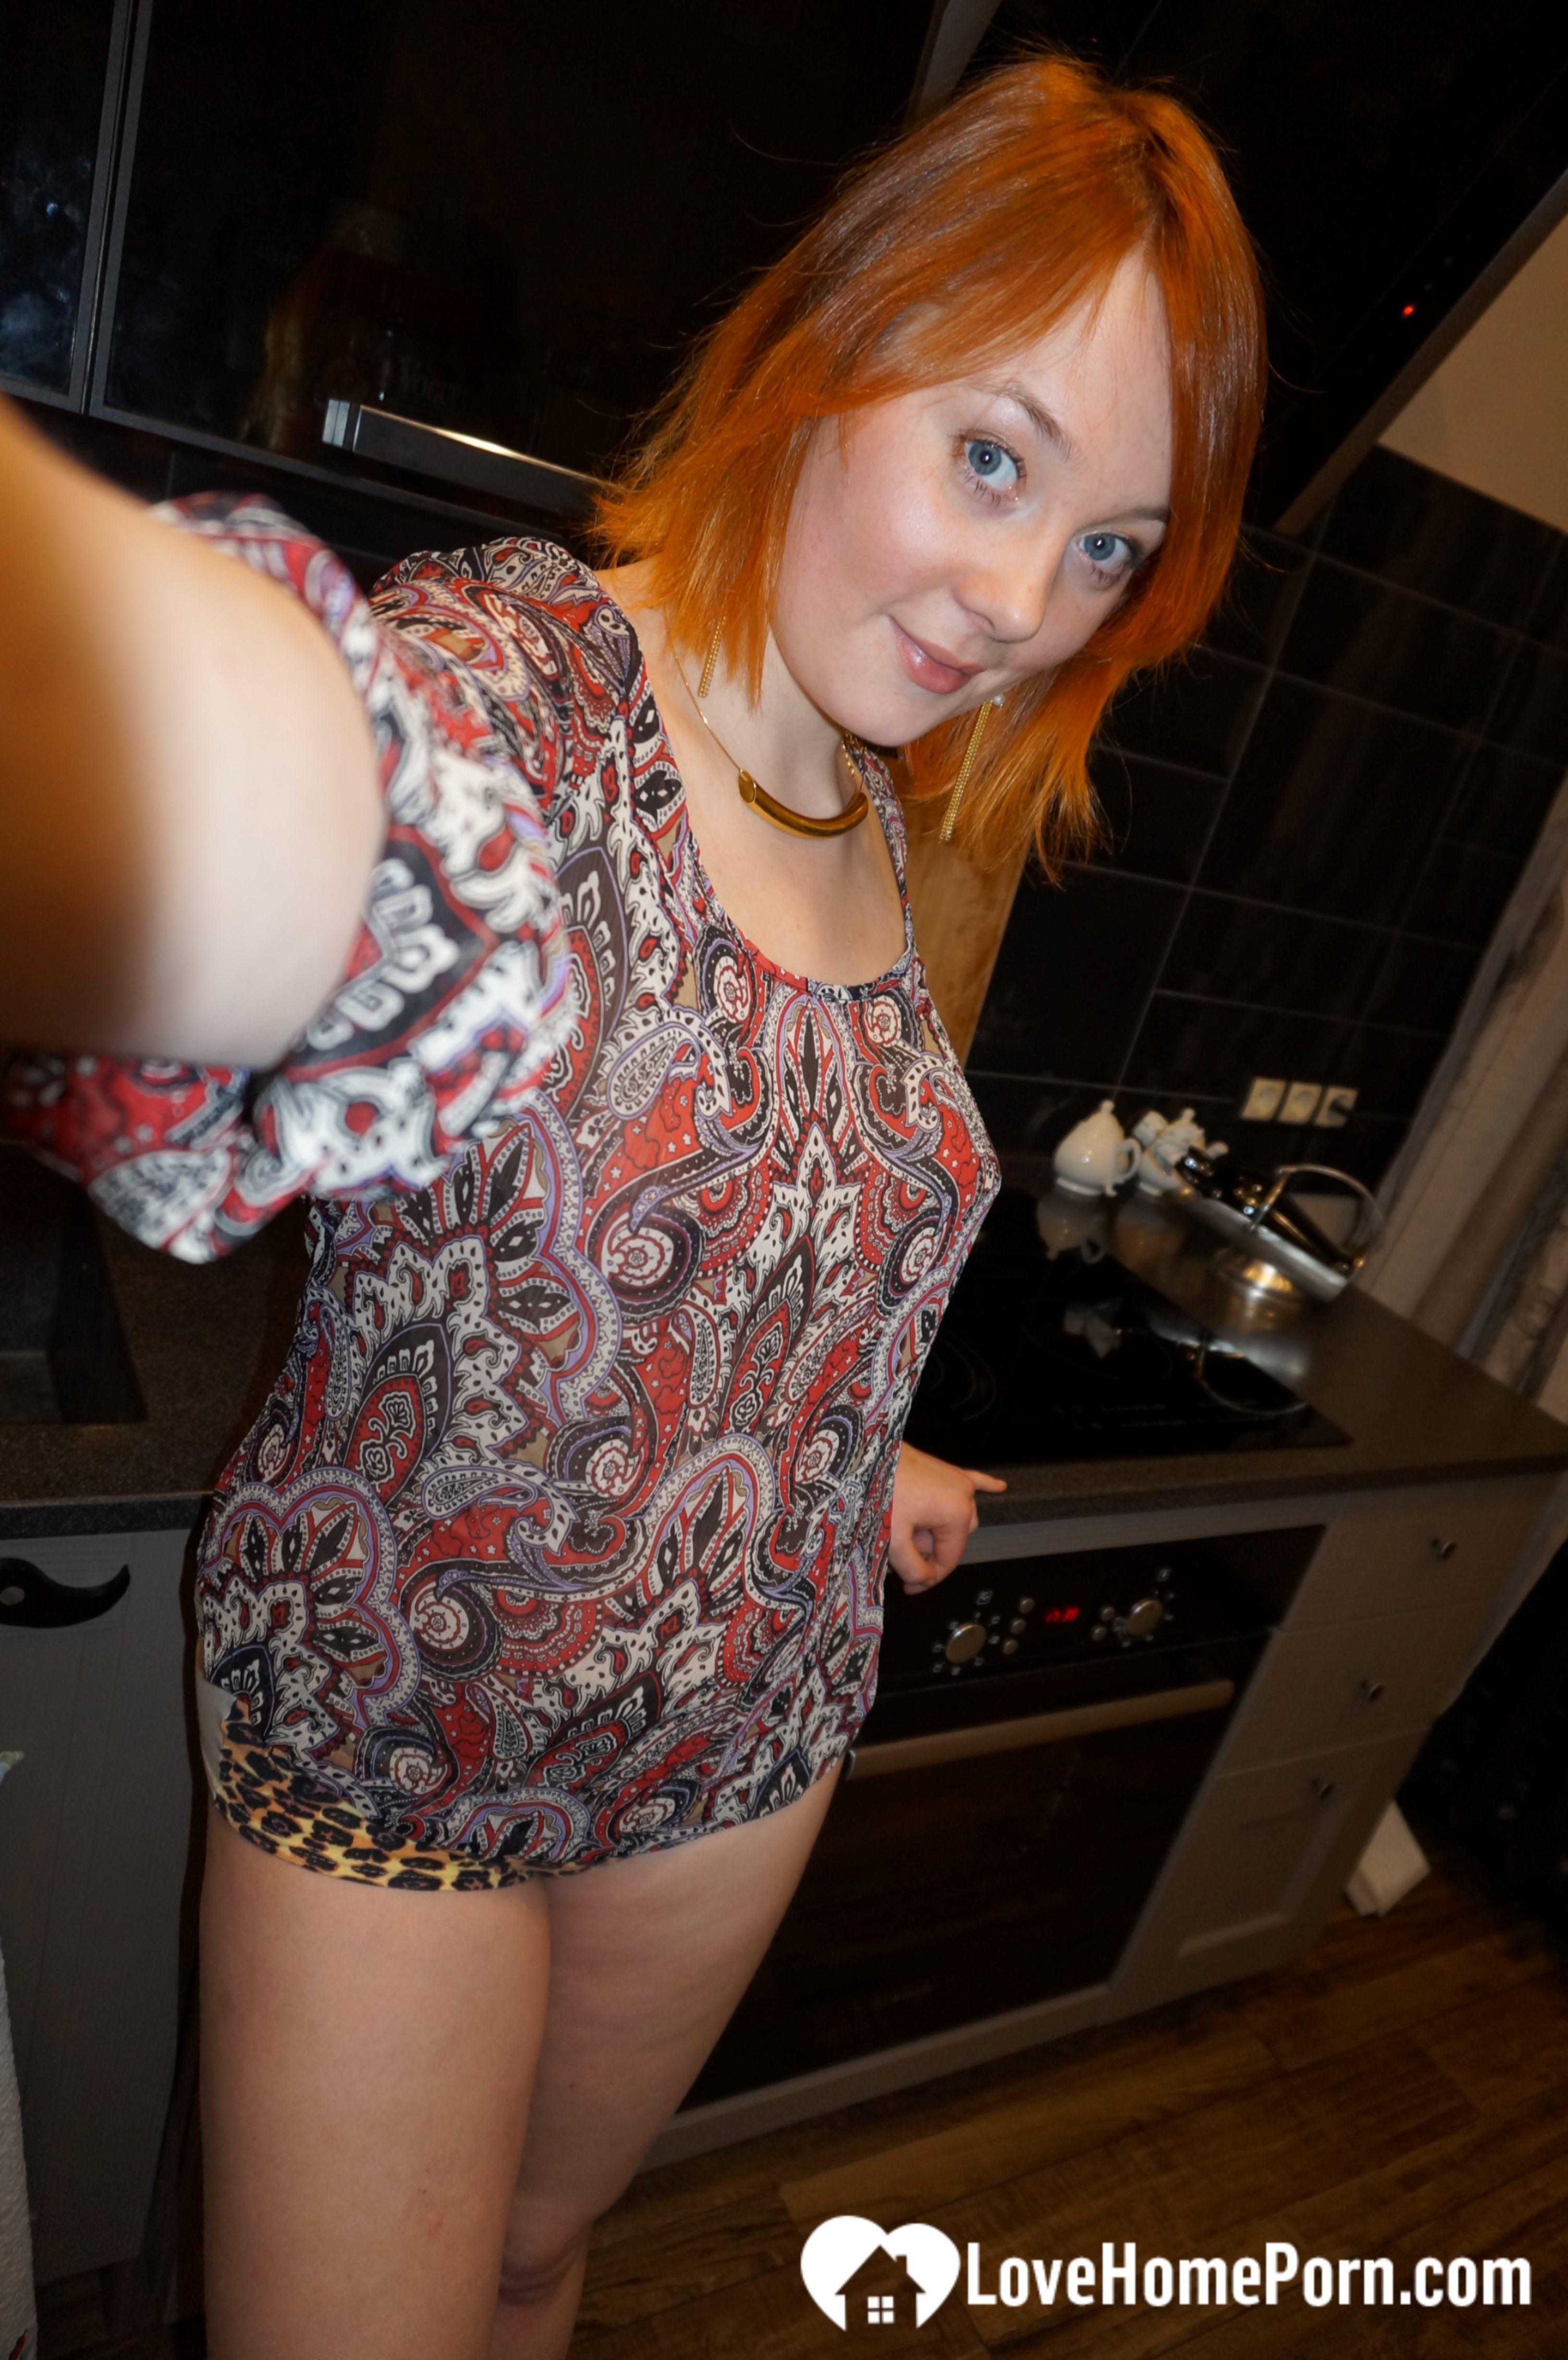 Hot redhead knows how to tease on camera